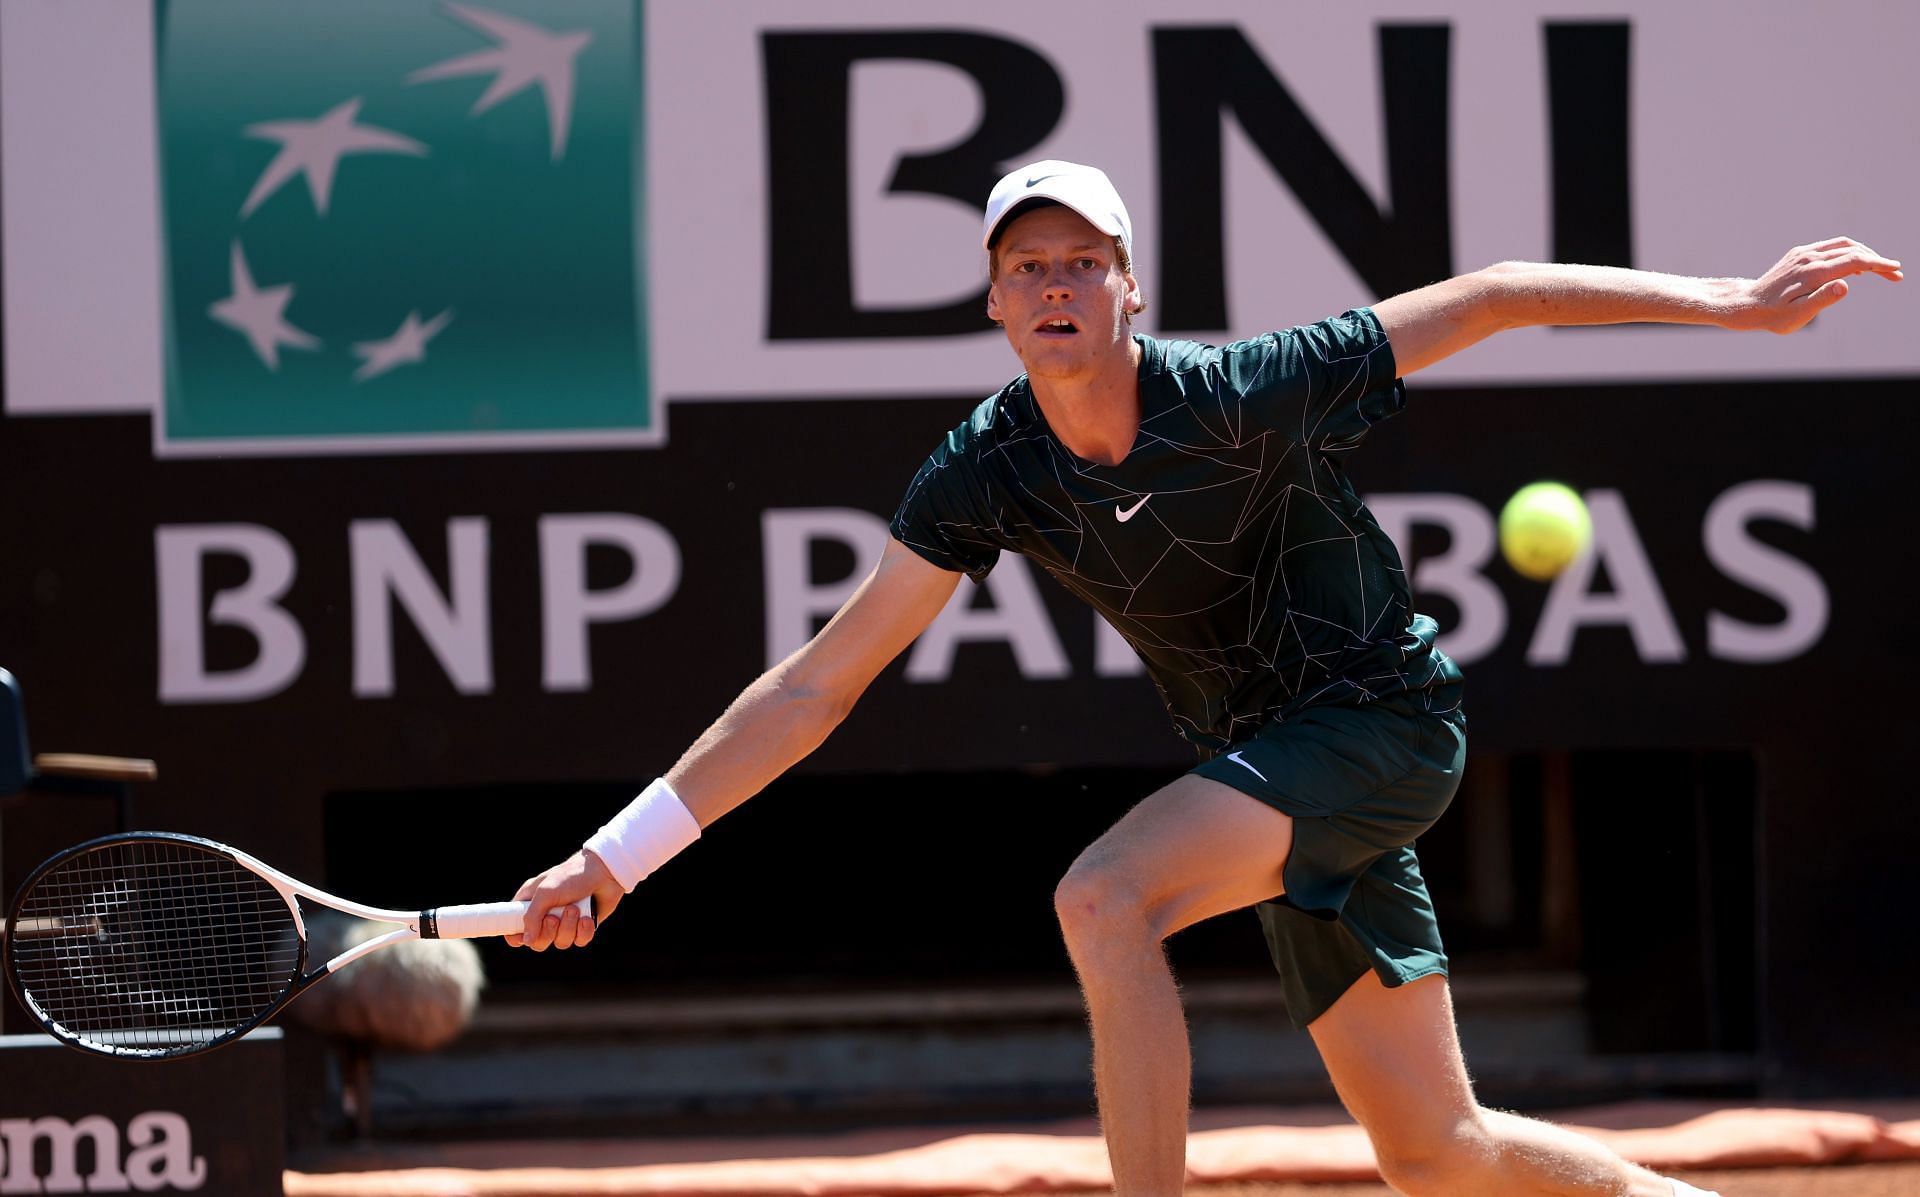 Jannik Sinner is in the second round of the French Open